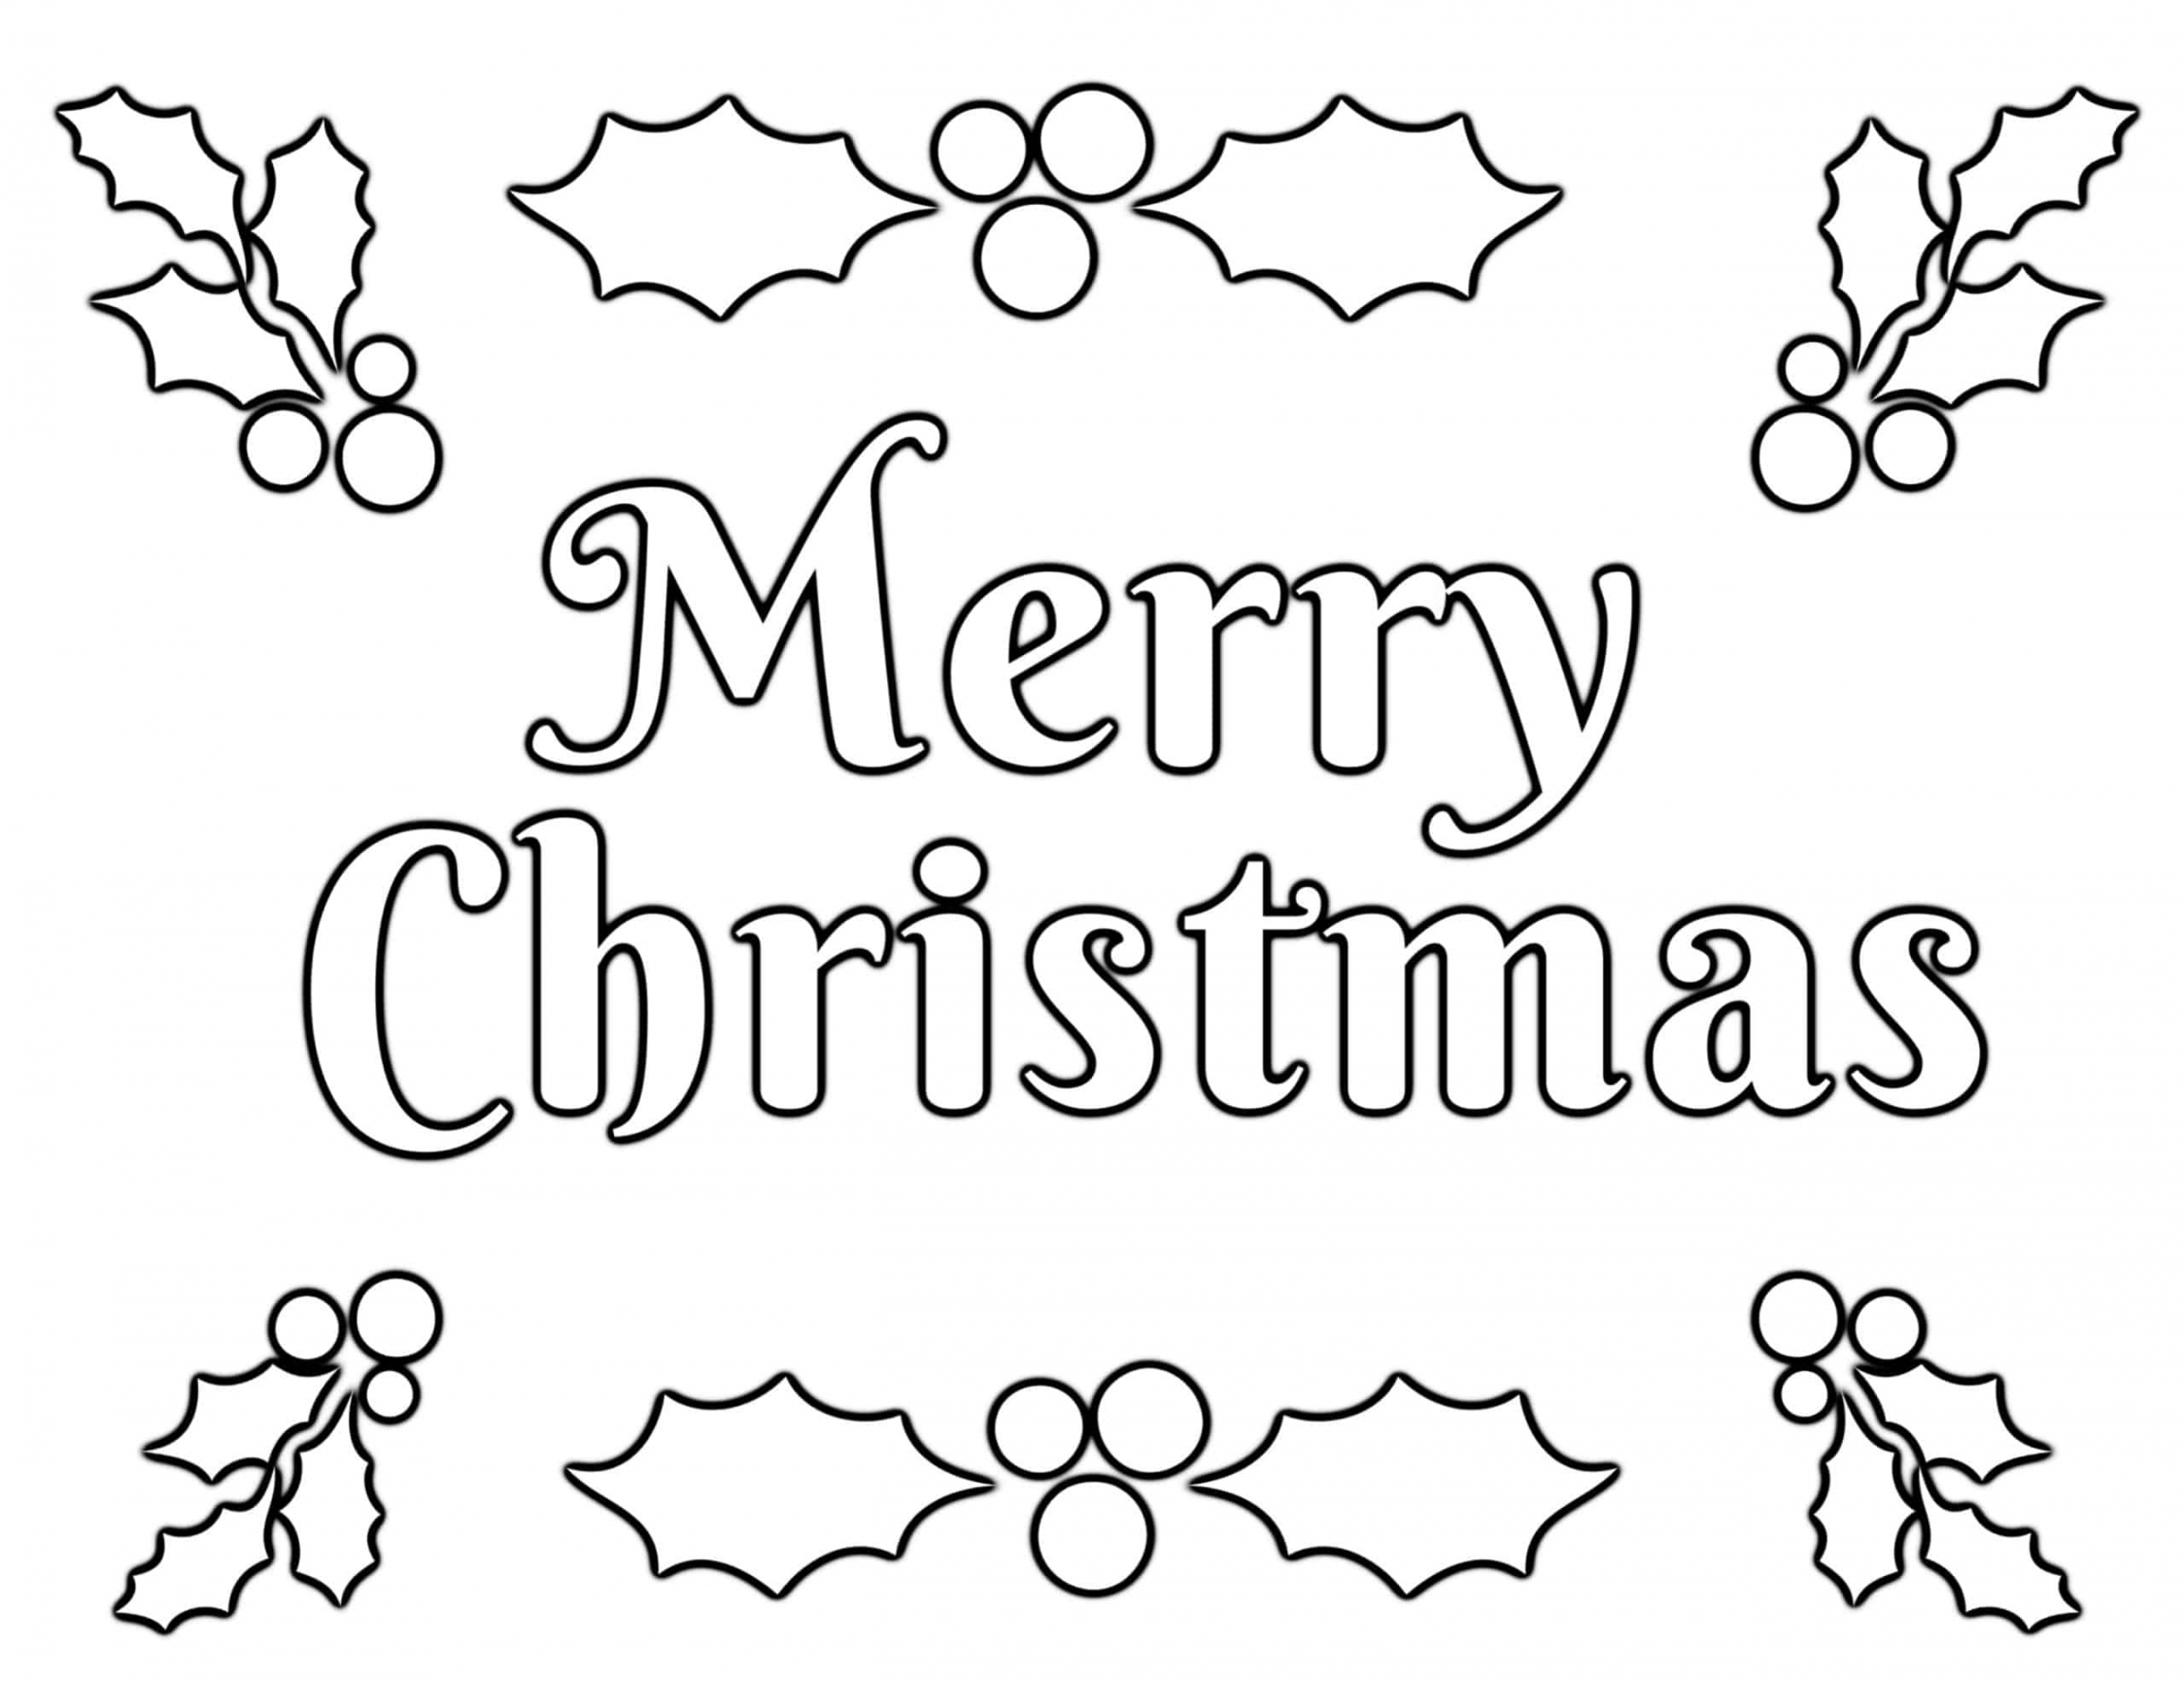 Printable Christmas Coloring Pages Free - Printable - Christmas Coloring Pages for Kids (% FREE) Easy Printable PDF